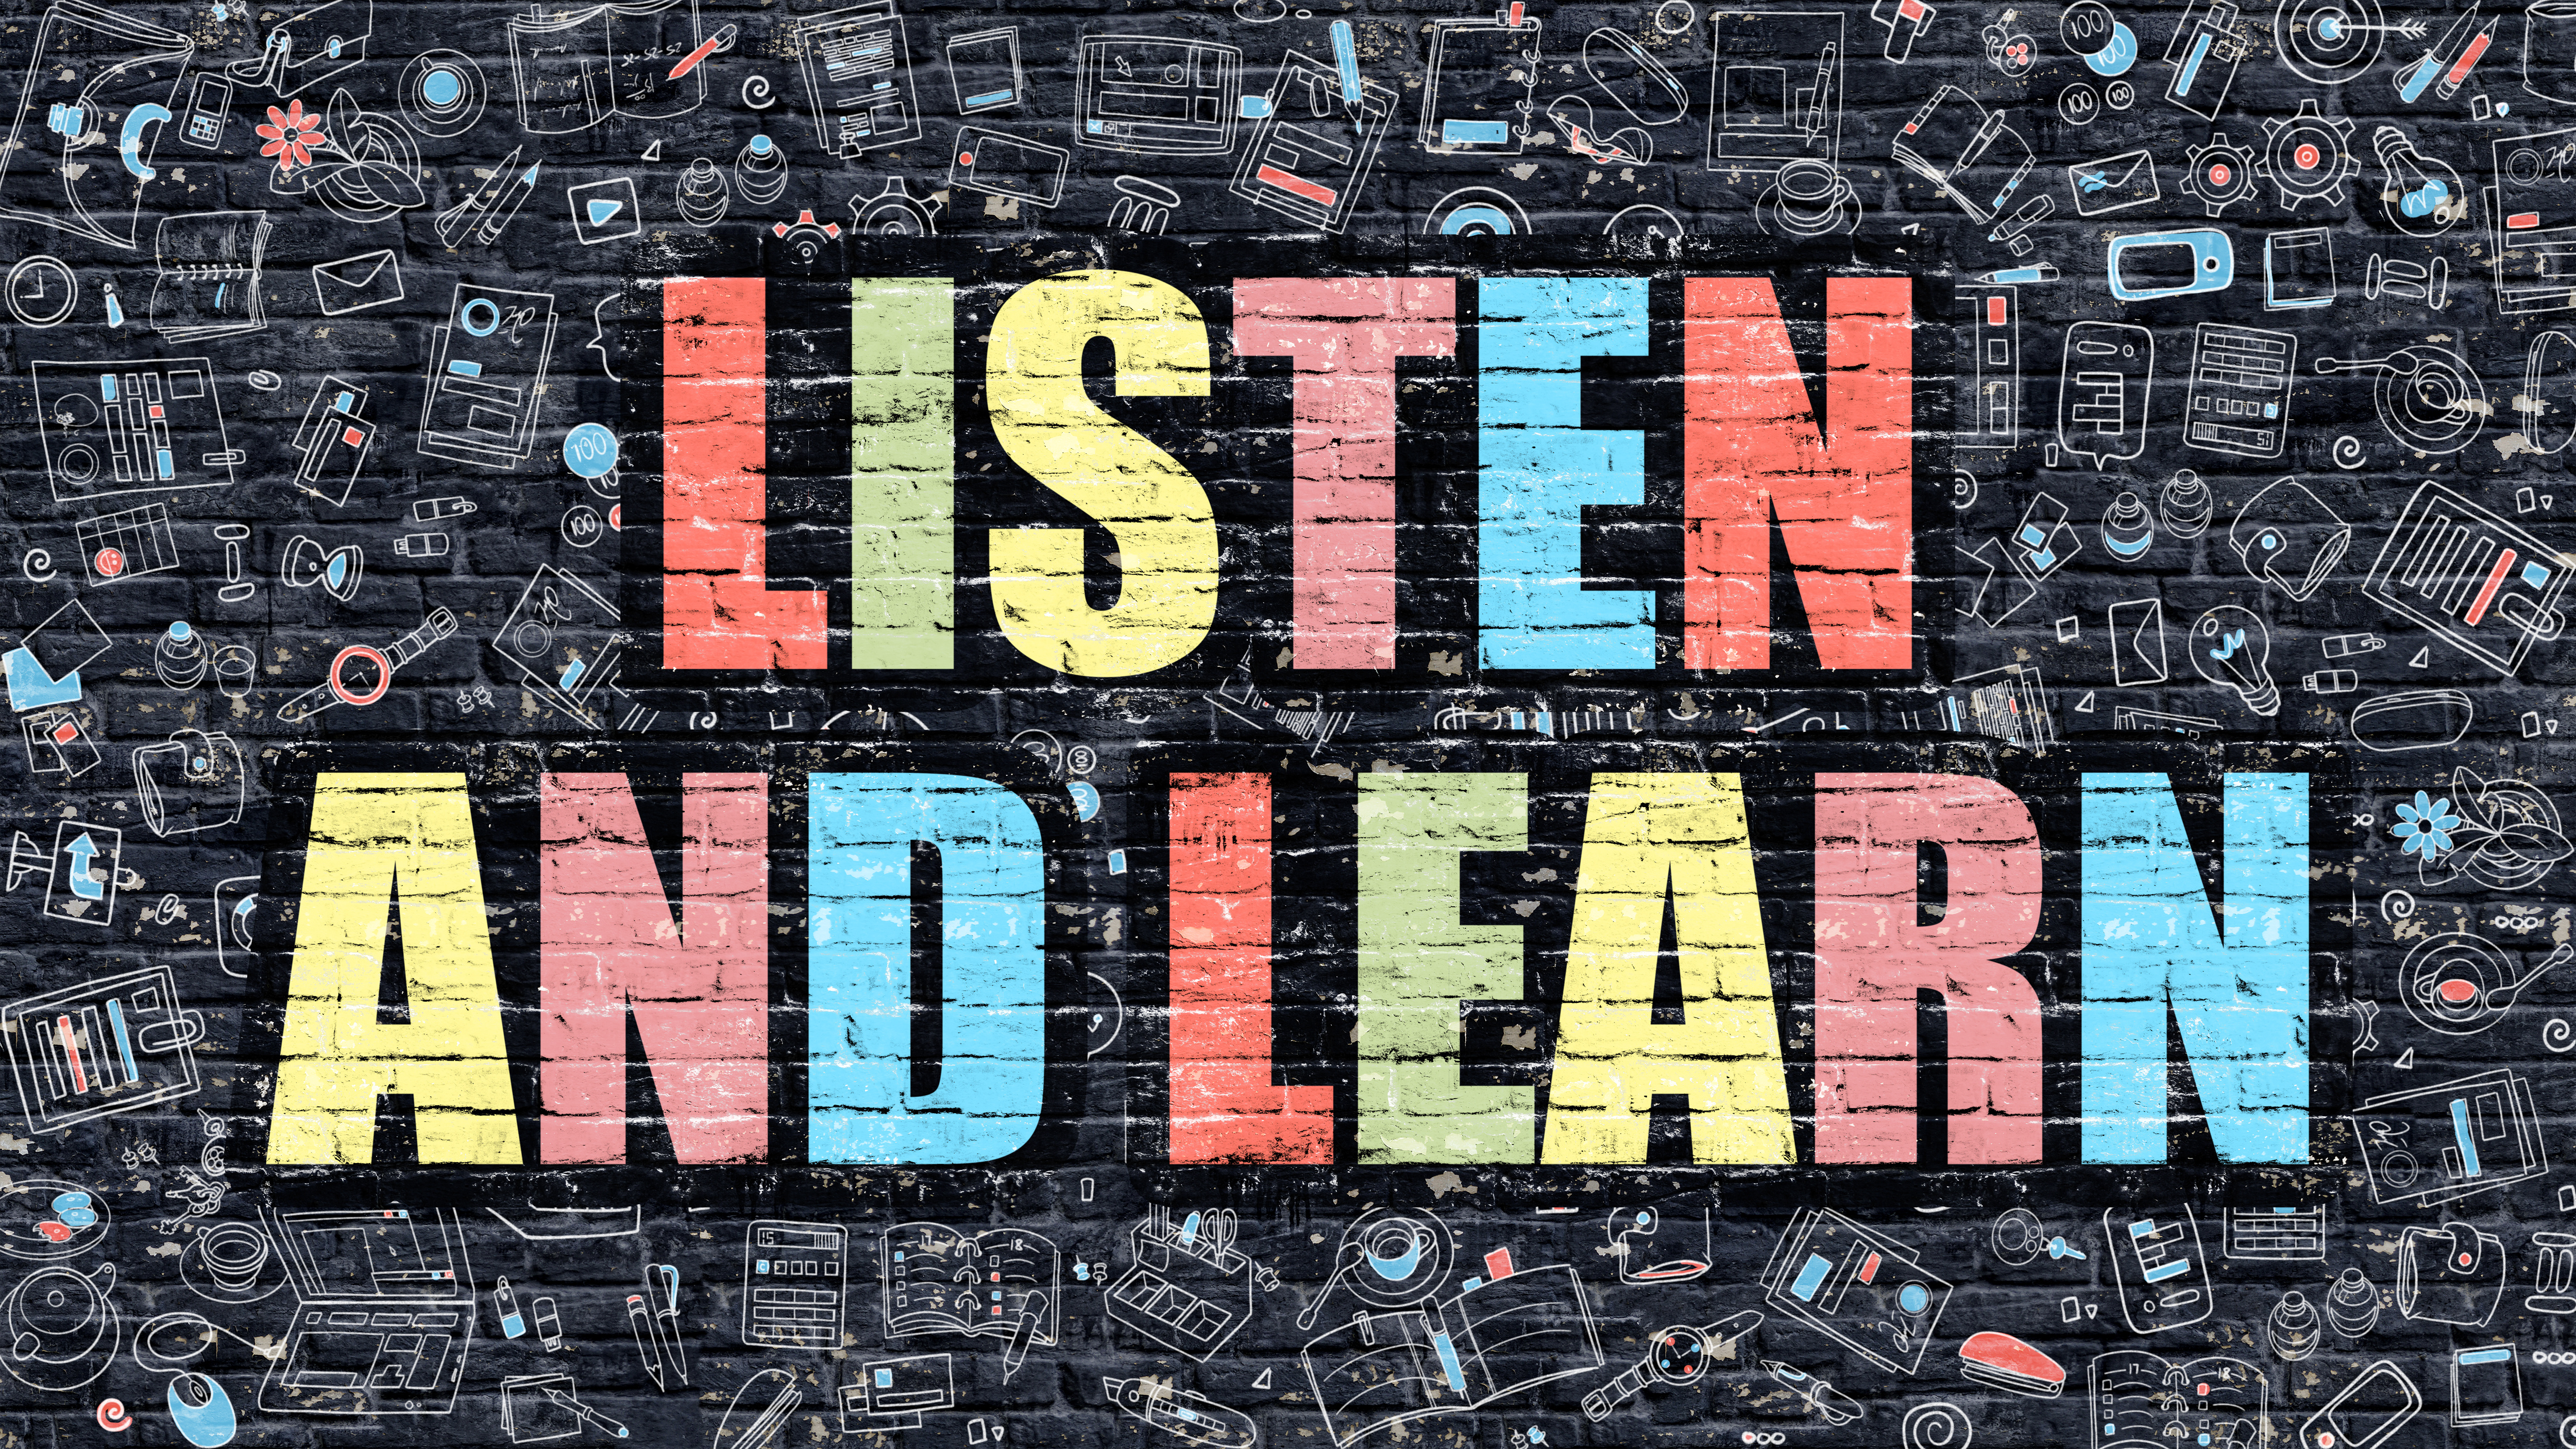 Listen and learn slogan showing the benefits of social listening